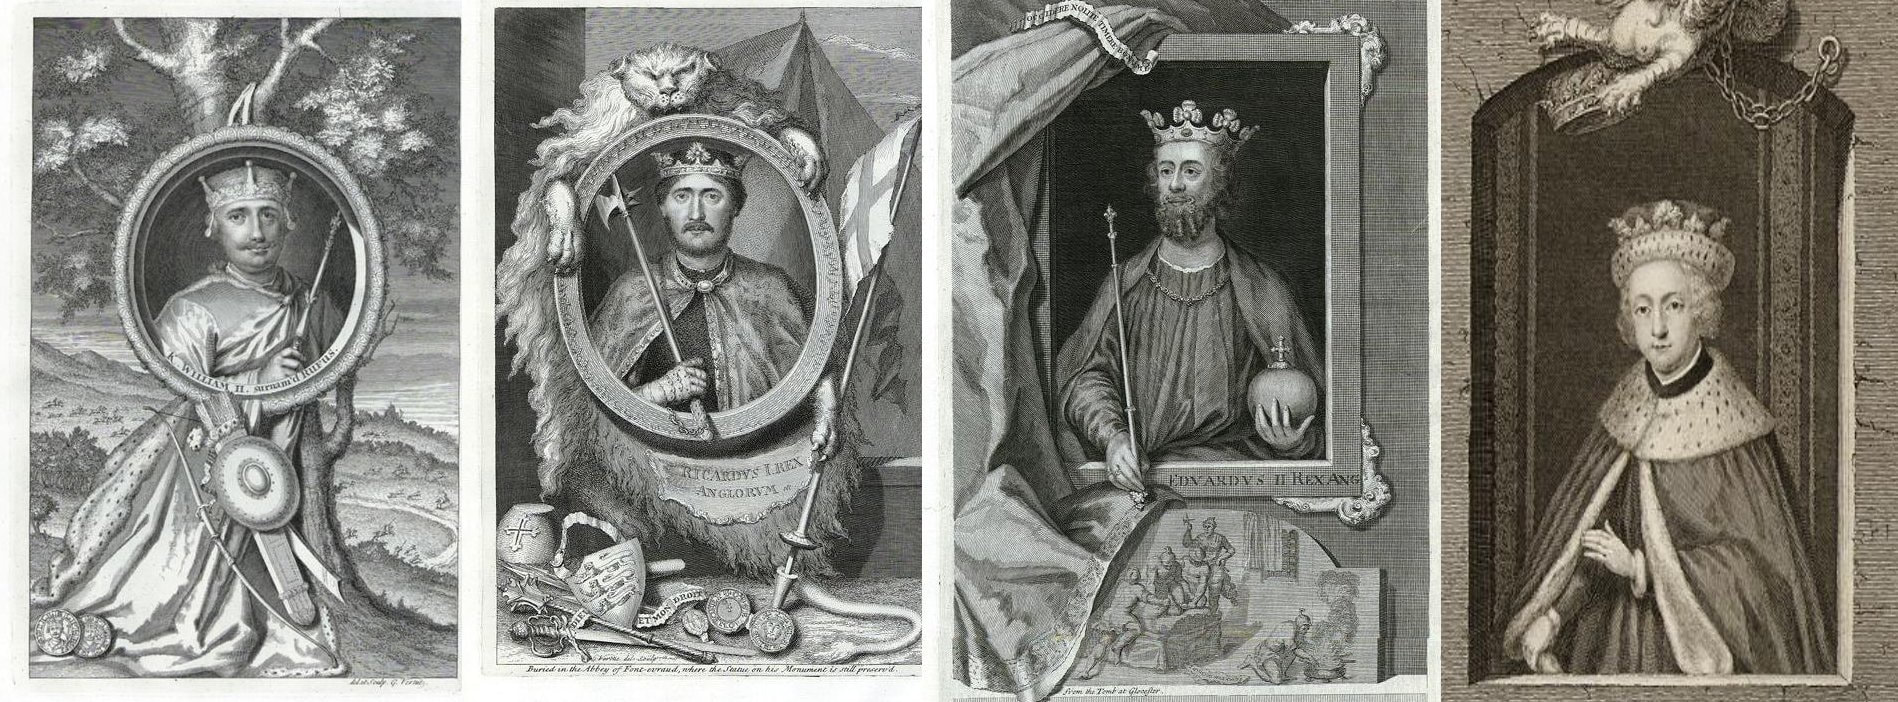 The possibly murdered monarchs. From left to right King William II, King Richard I, King Edward II and King Edward V. All images courtesy of ancestryimages.com